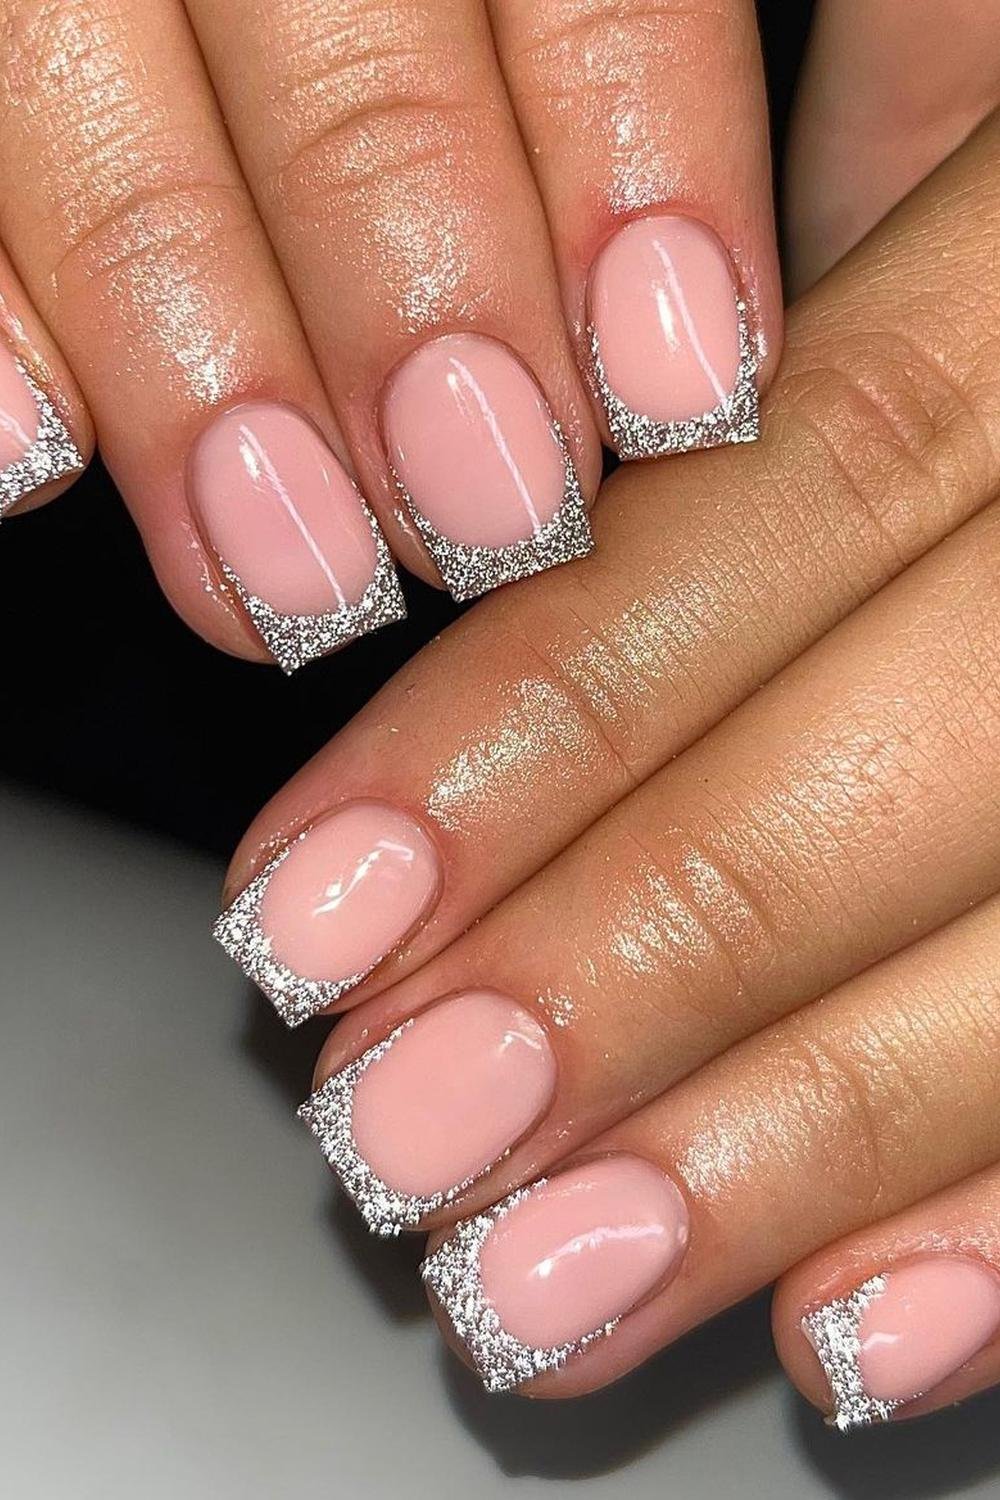 32 - Picture of Glitter French Tip Nails